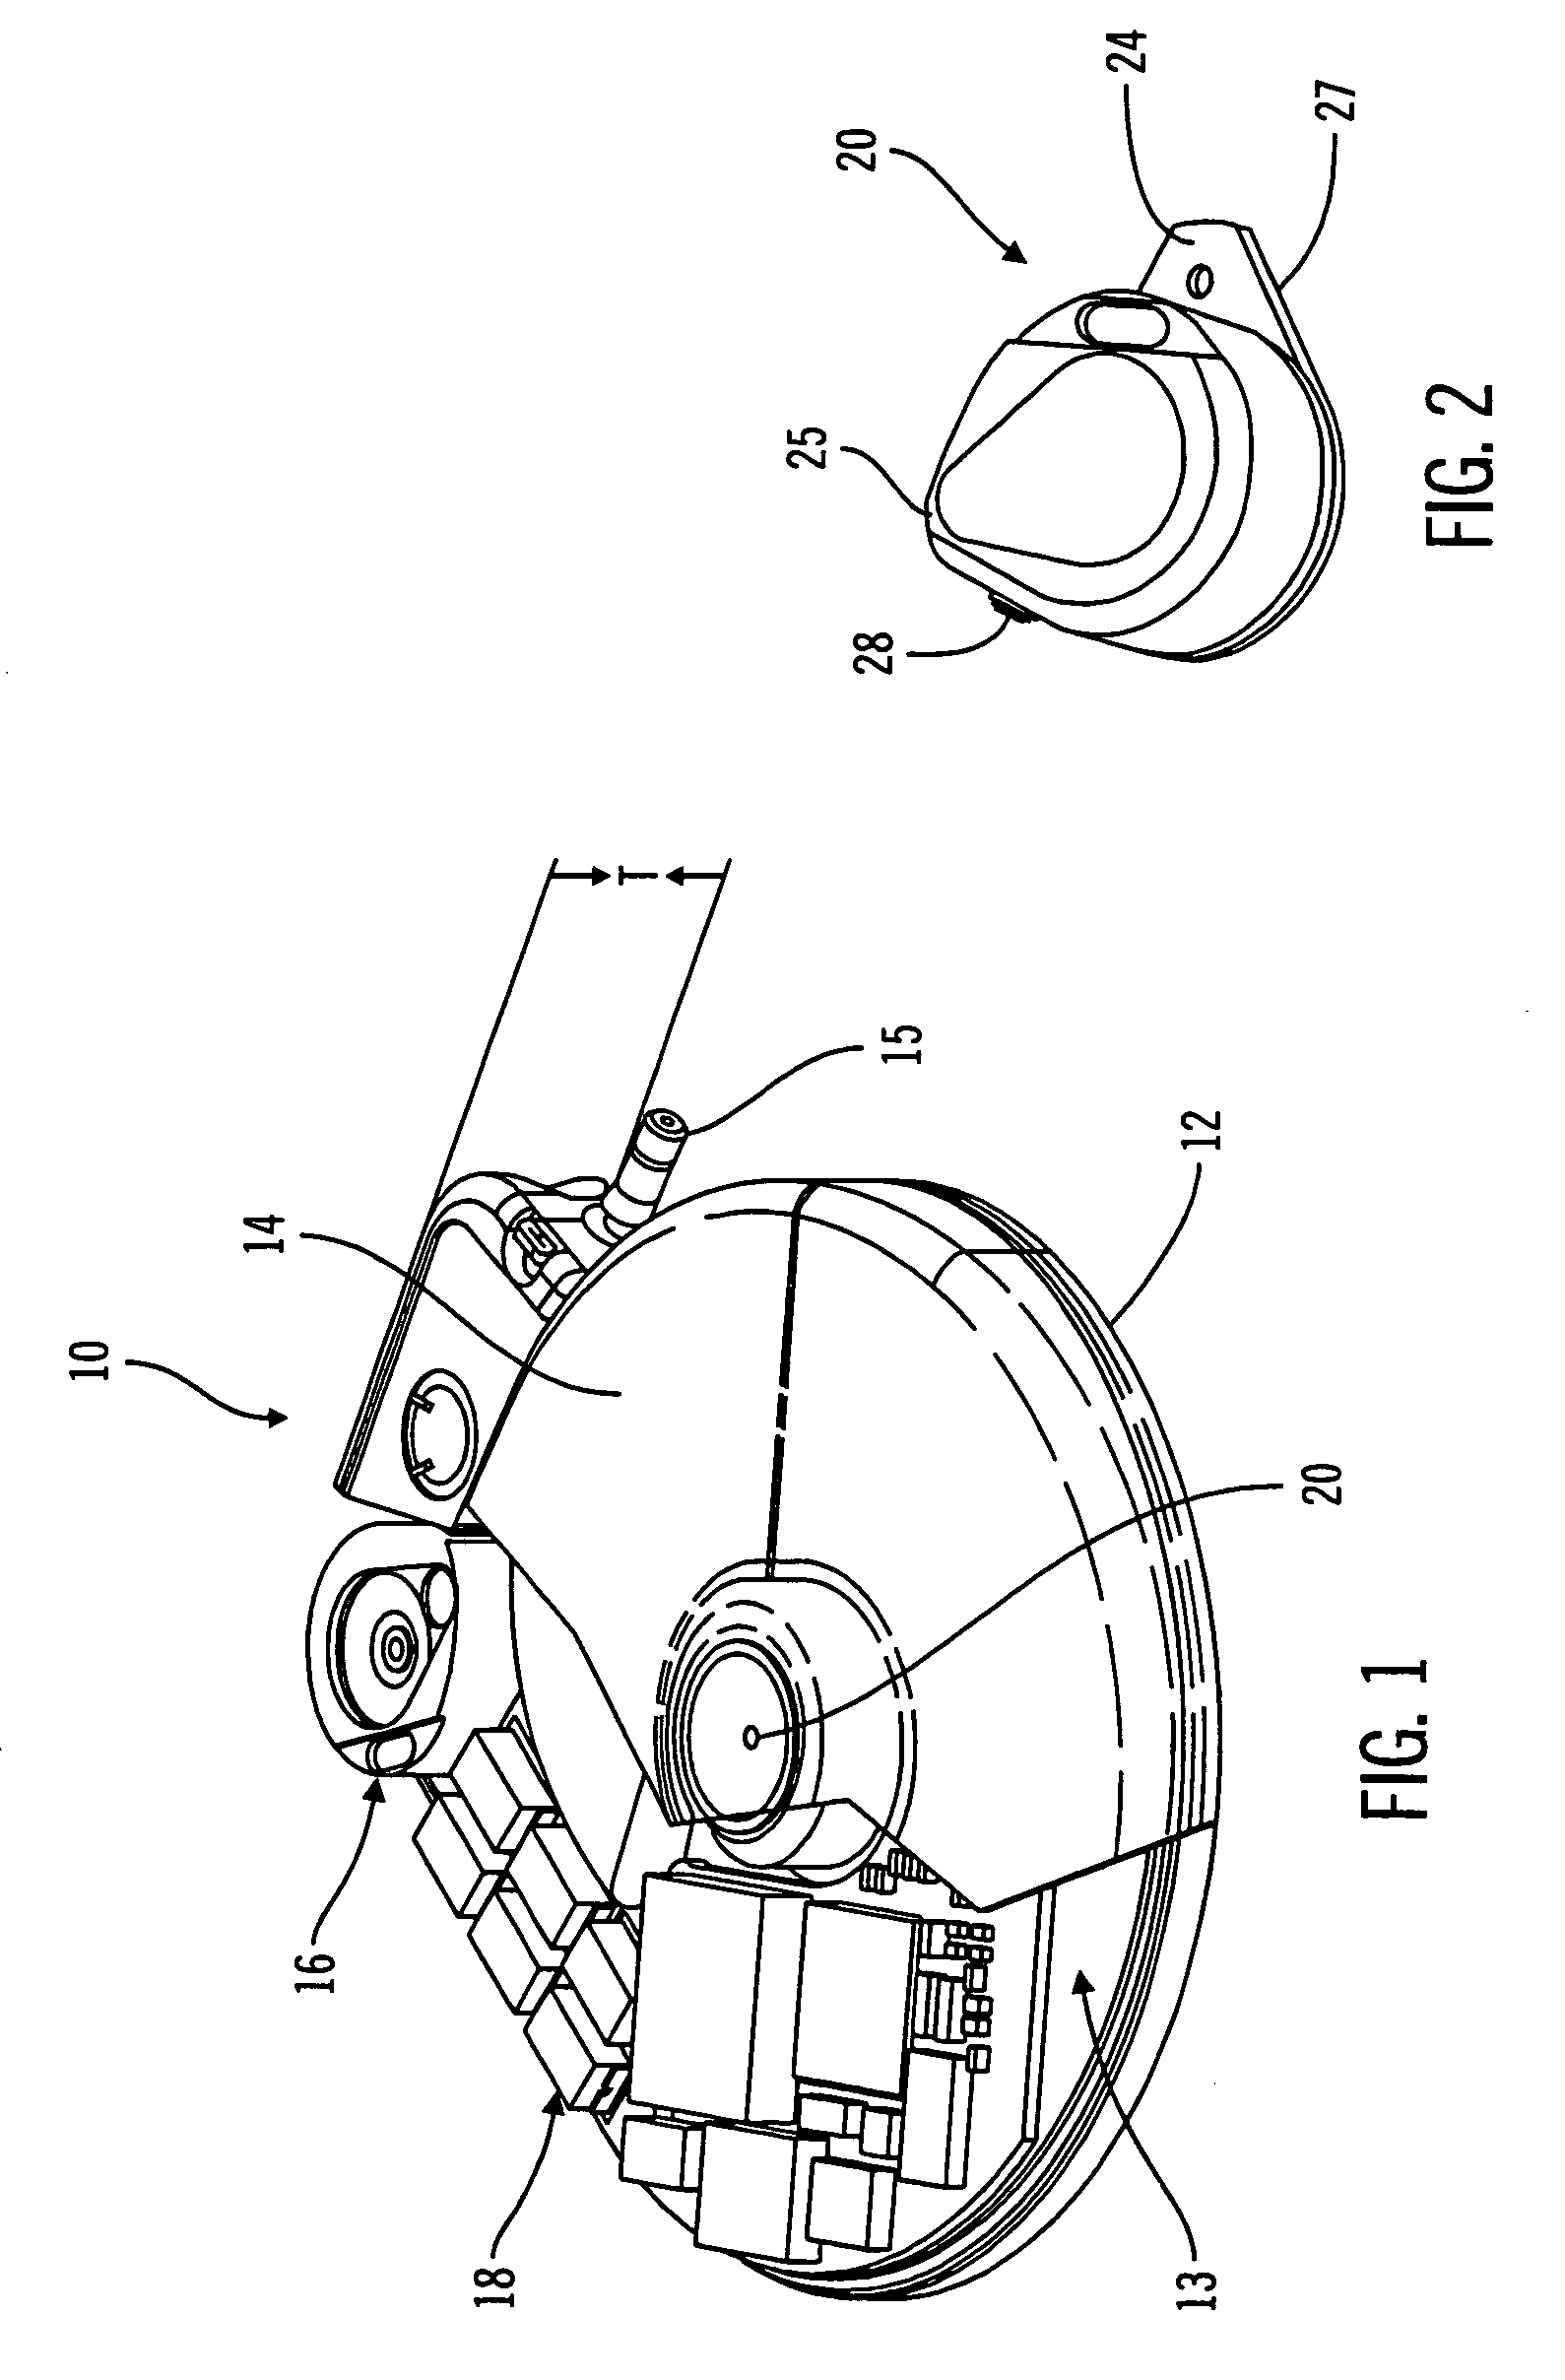 Infusion device and driving mechanism for same